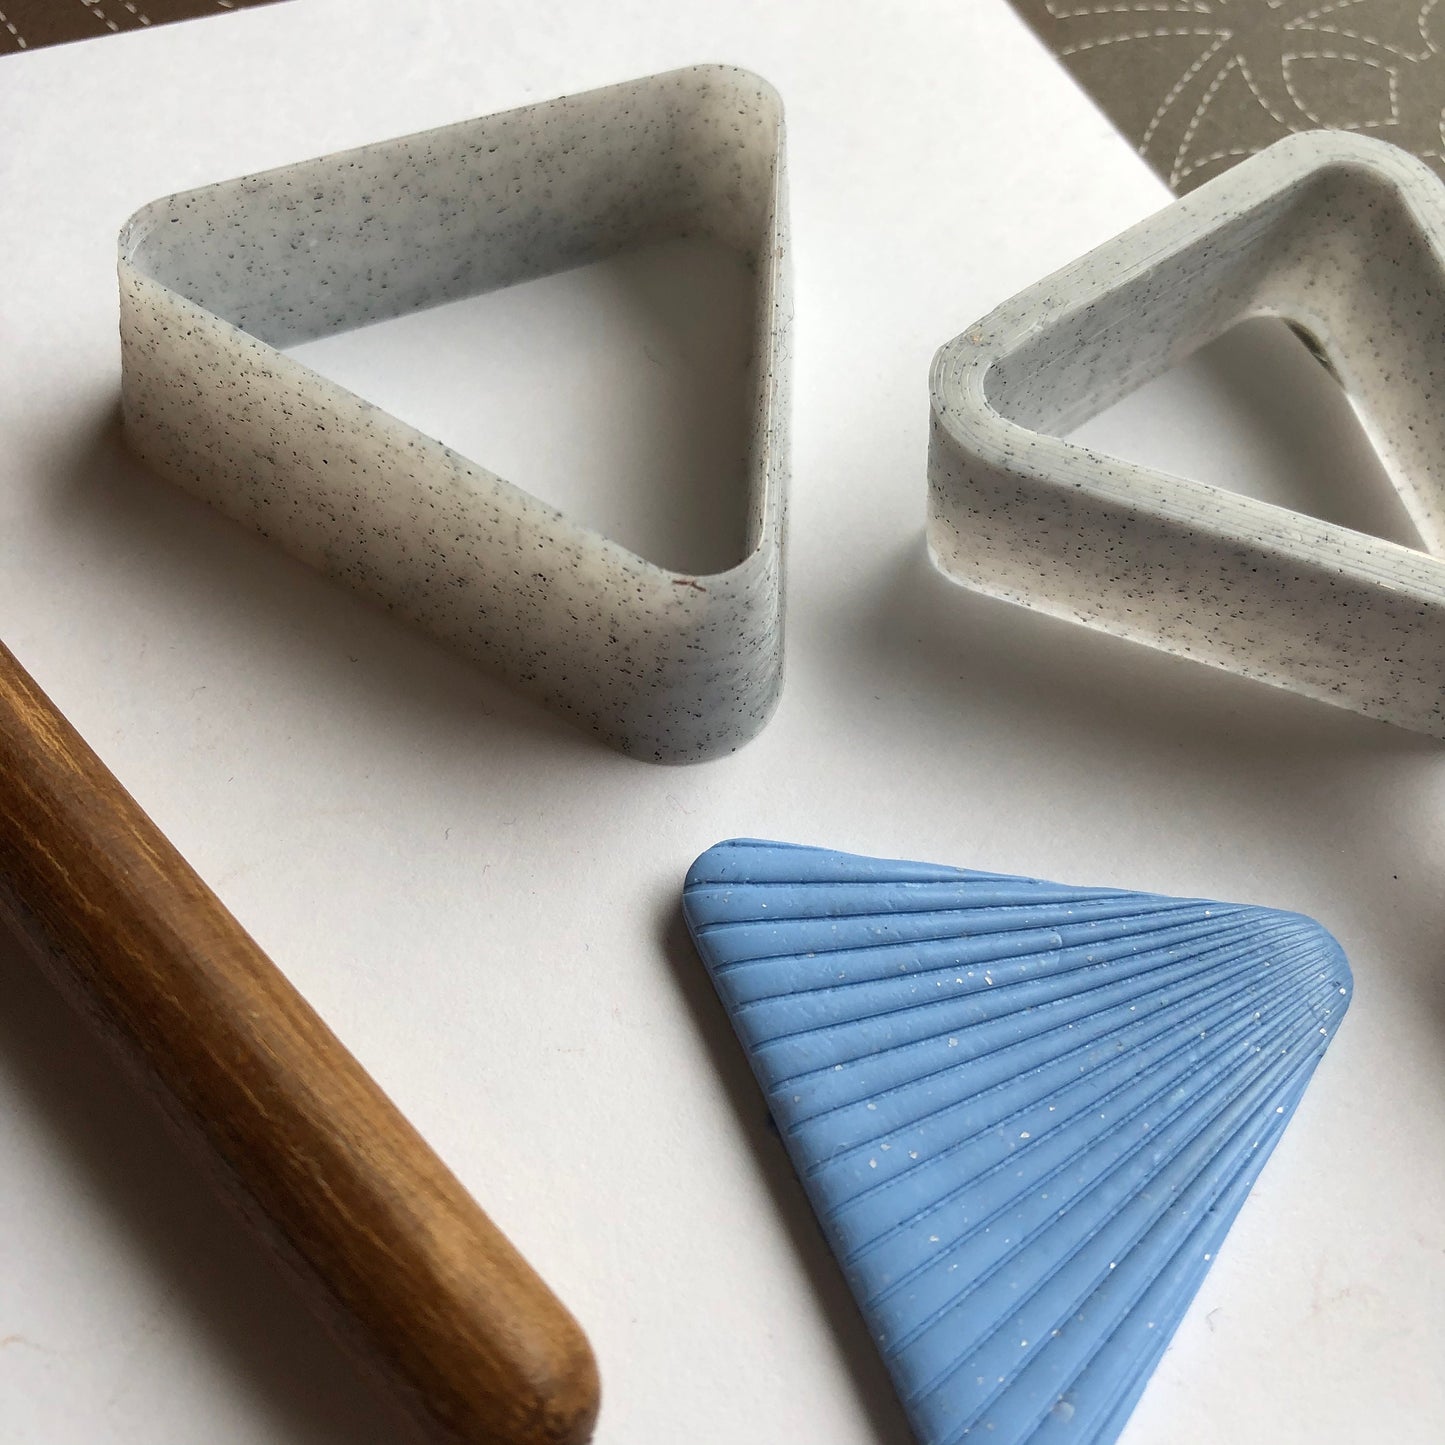 Equilateral triangle (with round corners) cutter set - made for use with polymer clay